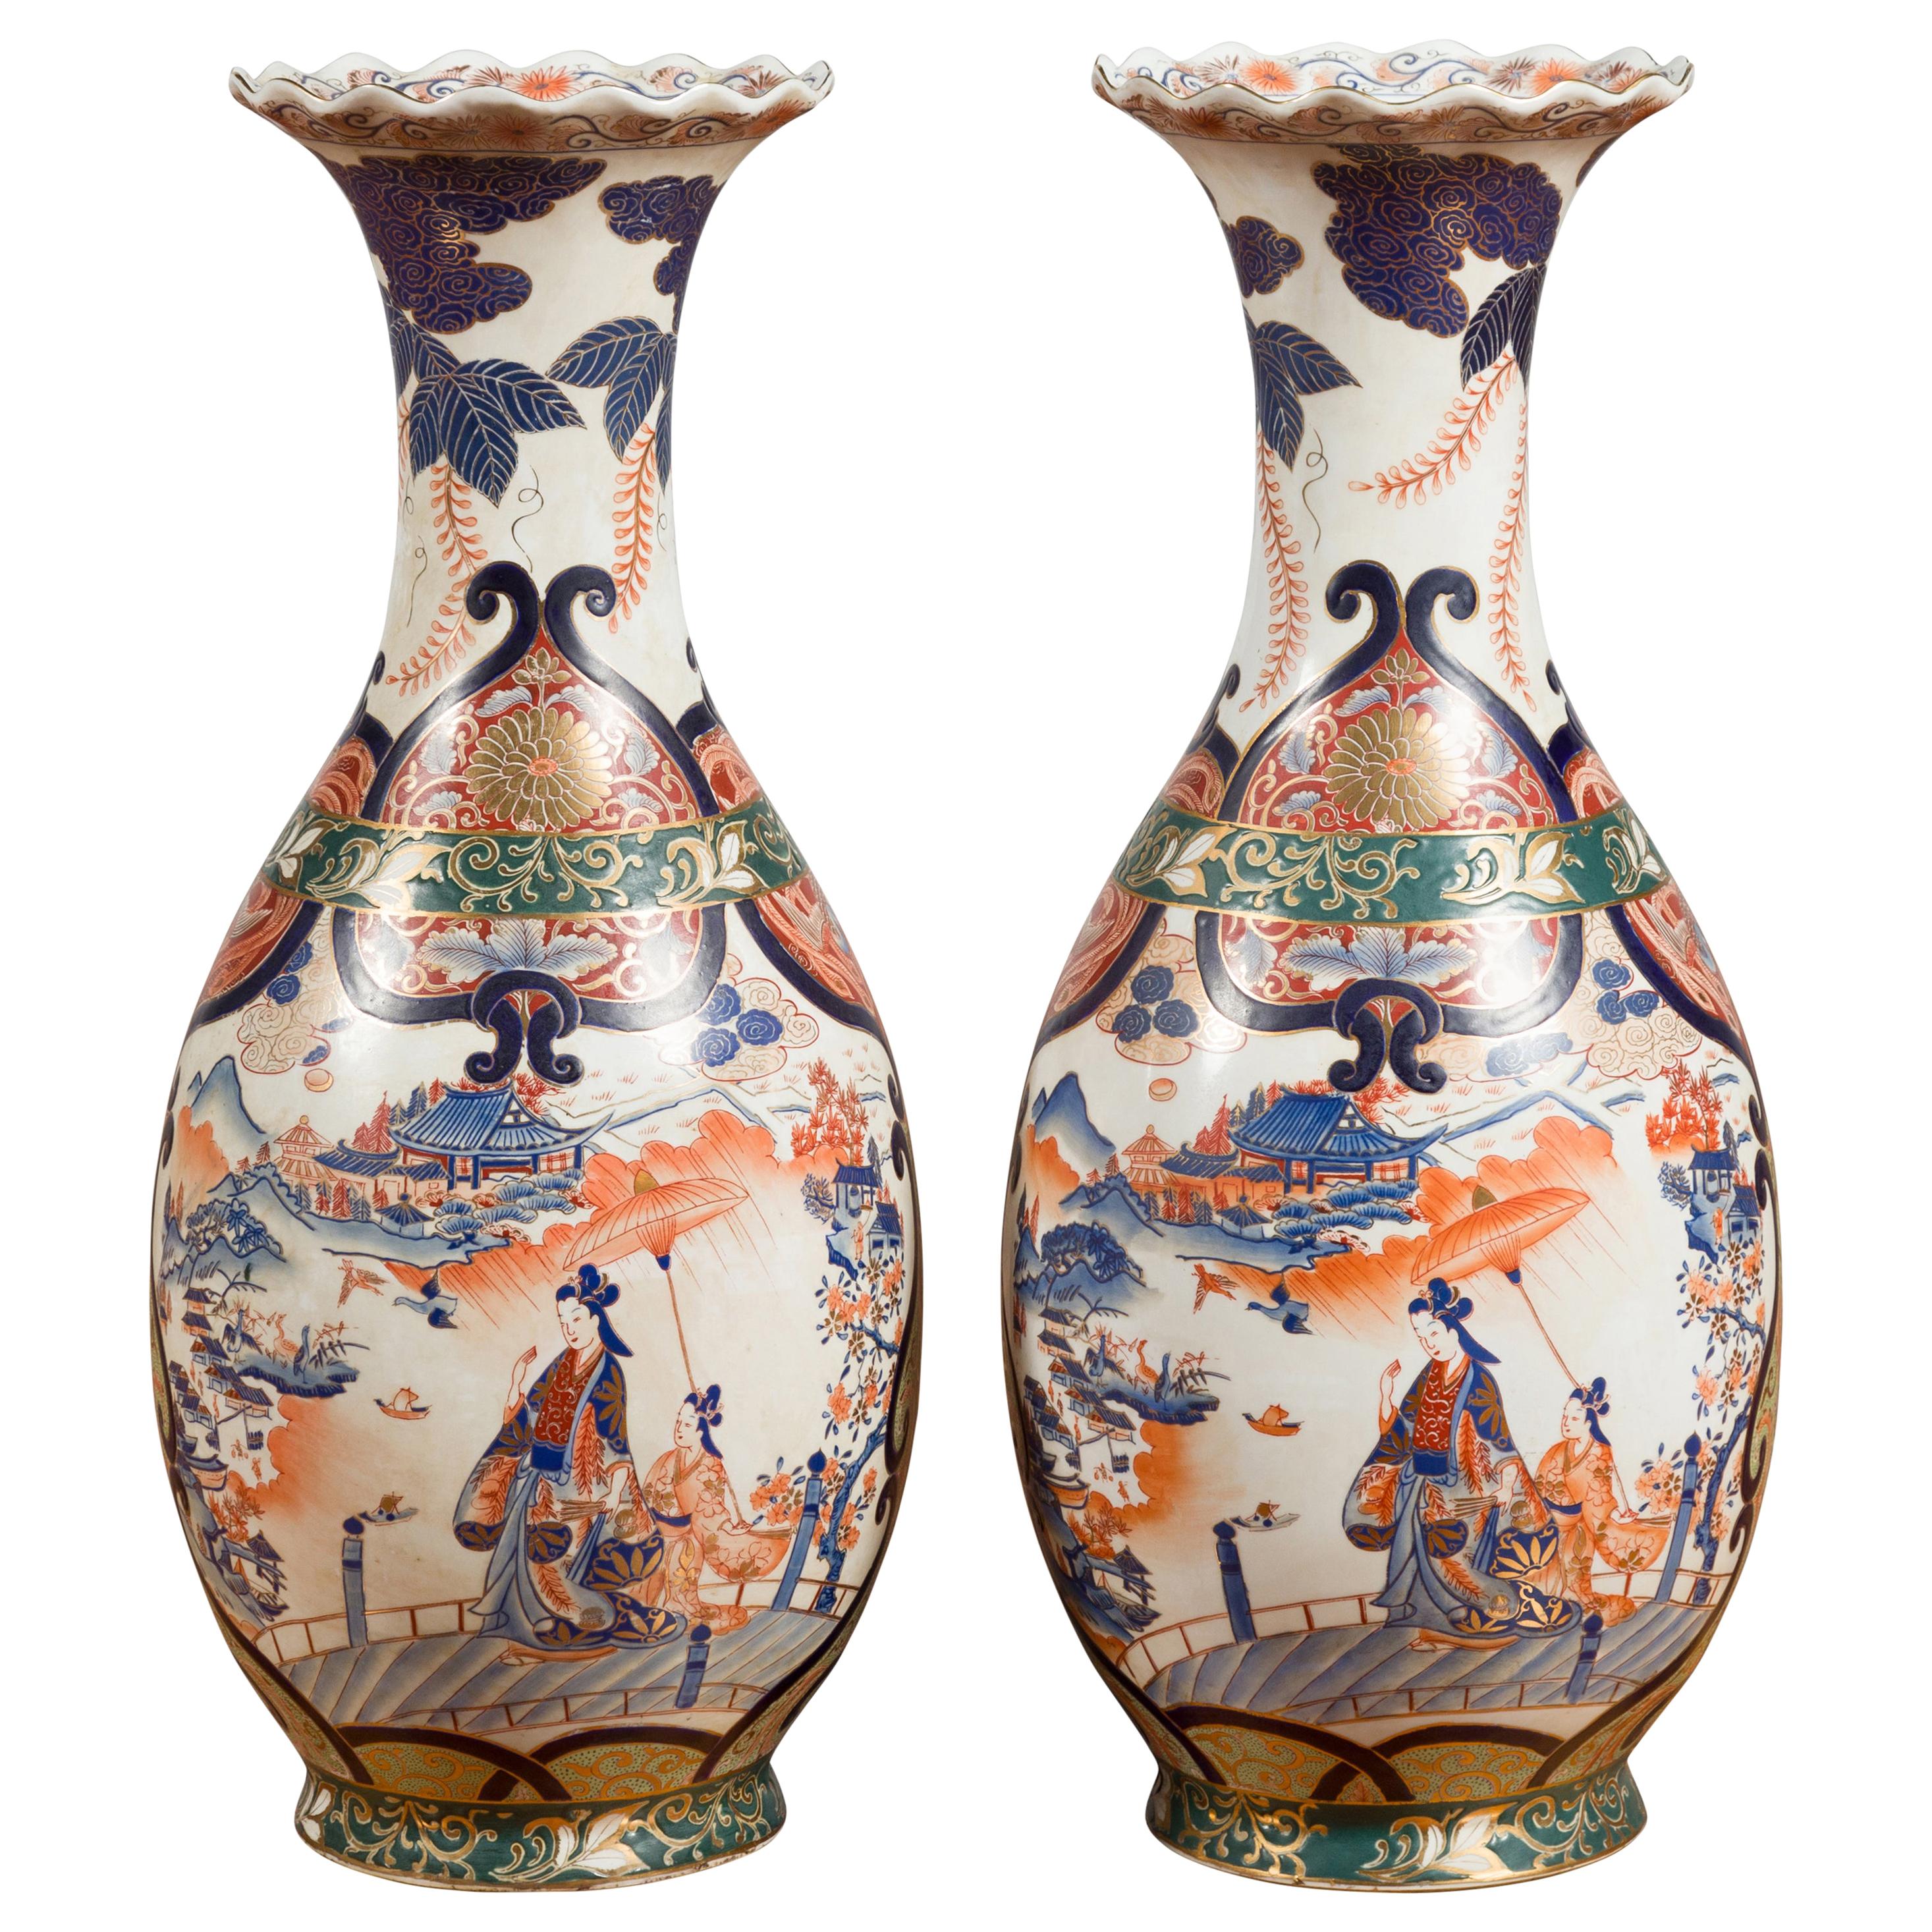 Pair of Chinese Arita Style Palace Vases with Blue, Orange, Green and Gold Decor